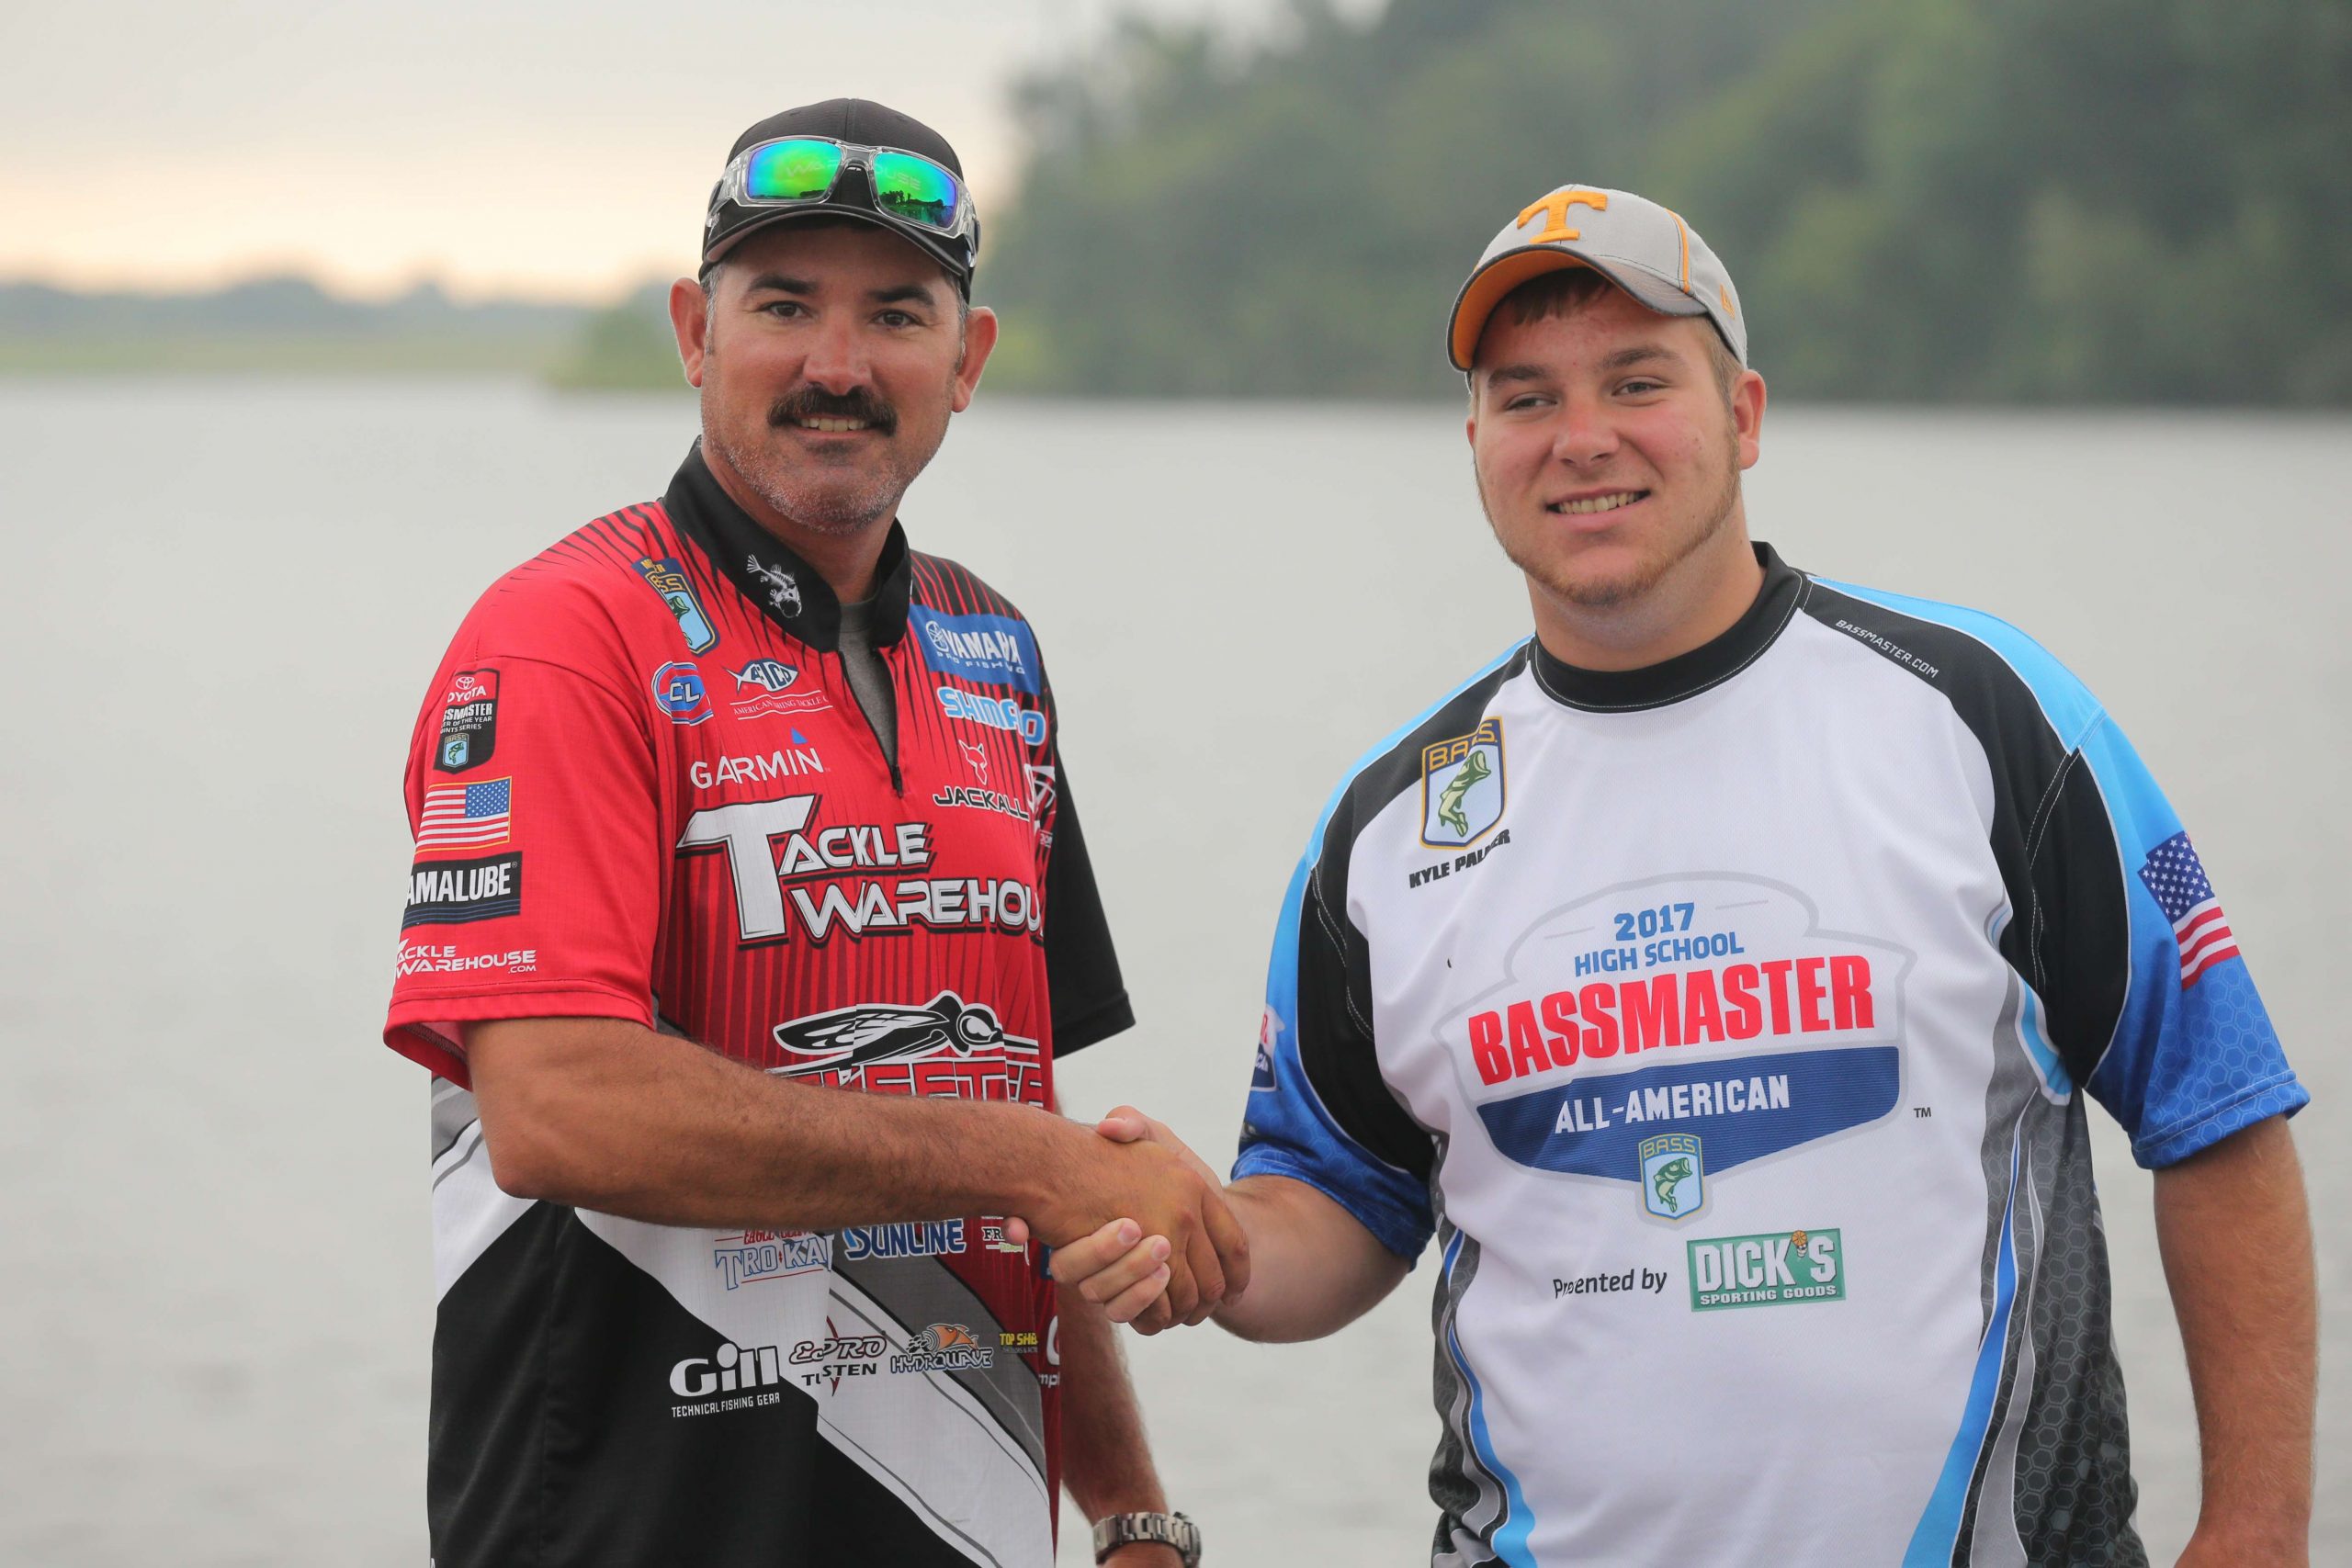 Grubbin' with Jared Lintner at Lopez Lake - Tackle Warehouse Pro's  Pointer's 